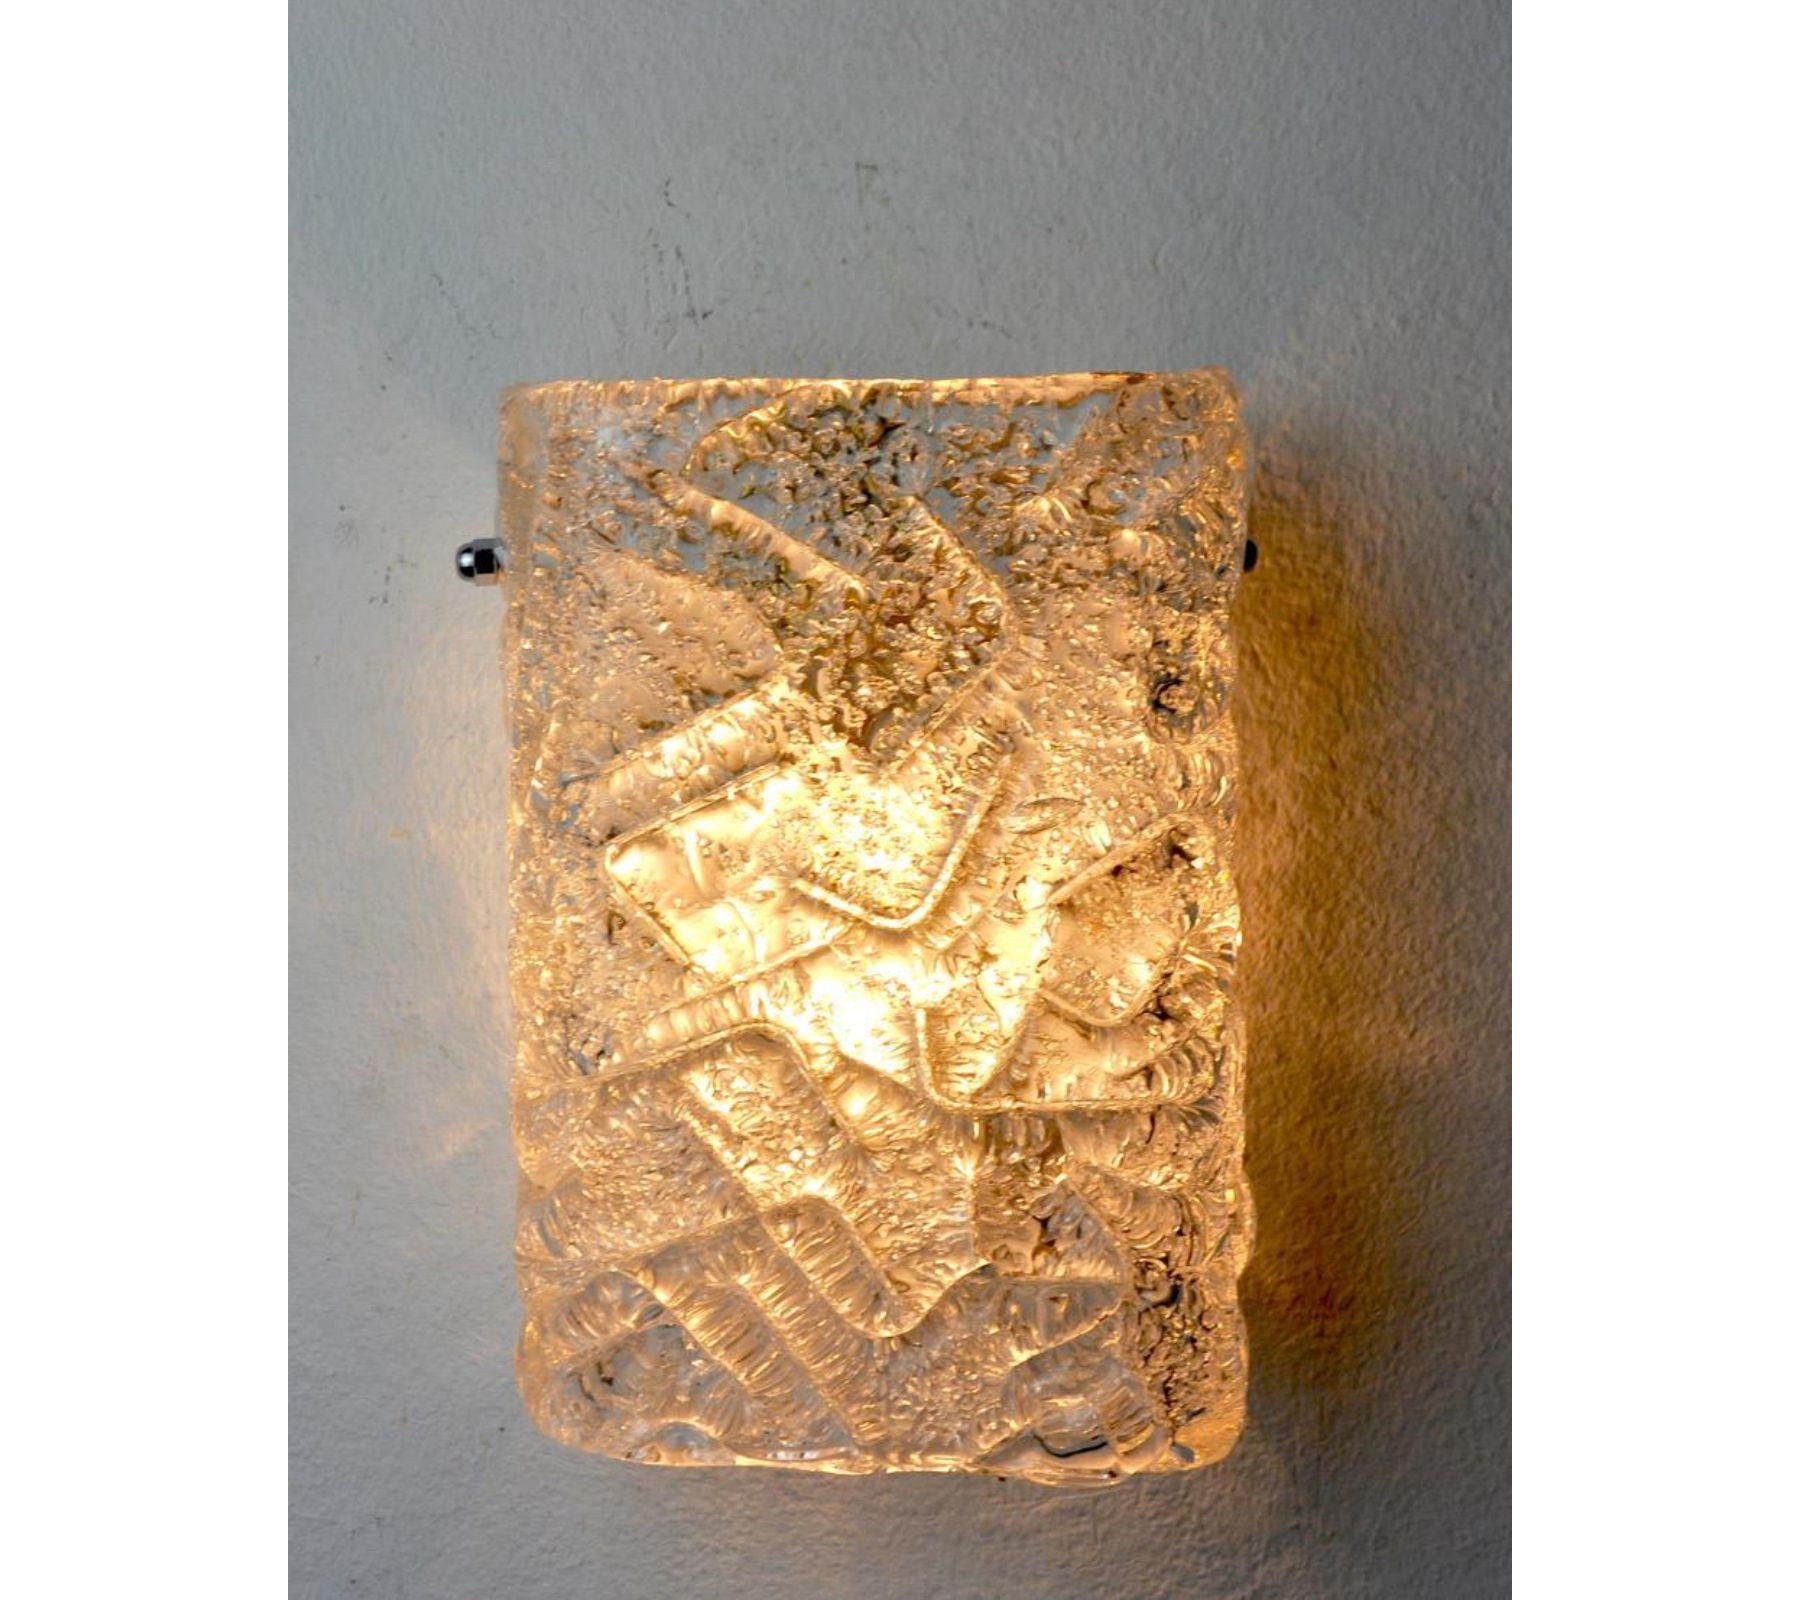 Superb wall lamp of carl fagerlund for lyfa dating from the 70s. Structure in gilded metal and frosted glass in the shape of a sheet. The diffused light is soft and harmonious perfect to illuminate your interior. Mark of time in accordance with the